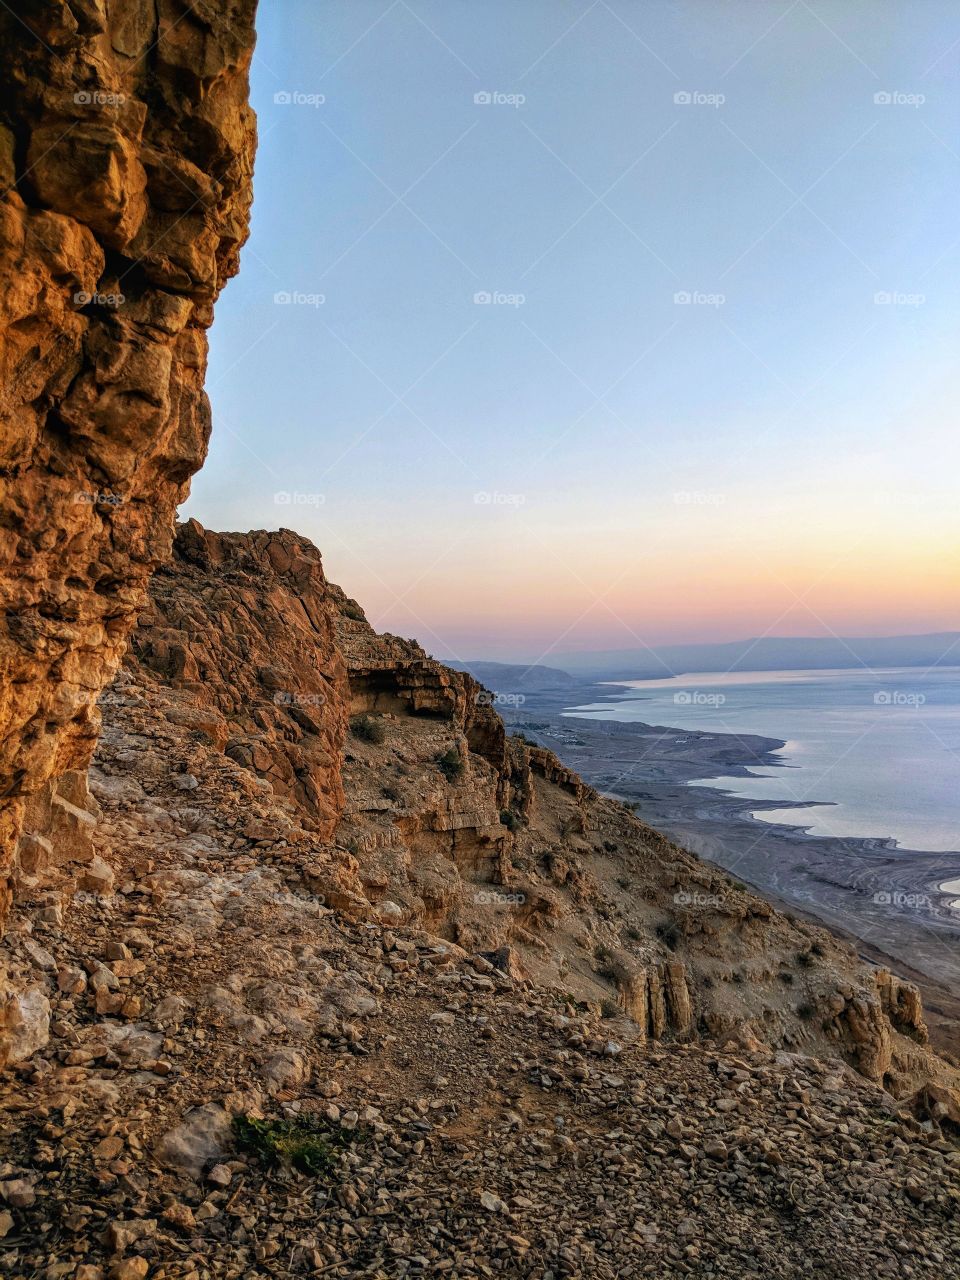 On a cliff above the Dead Sea